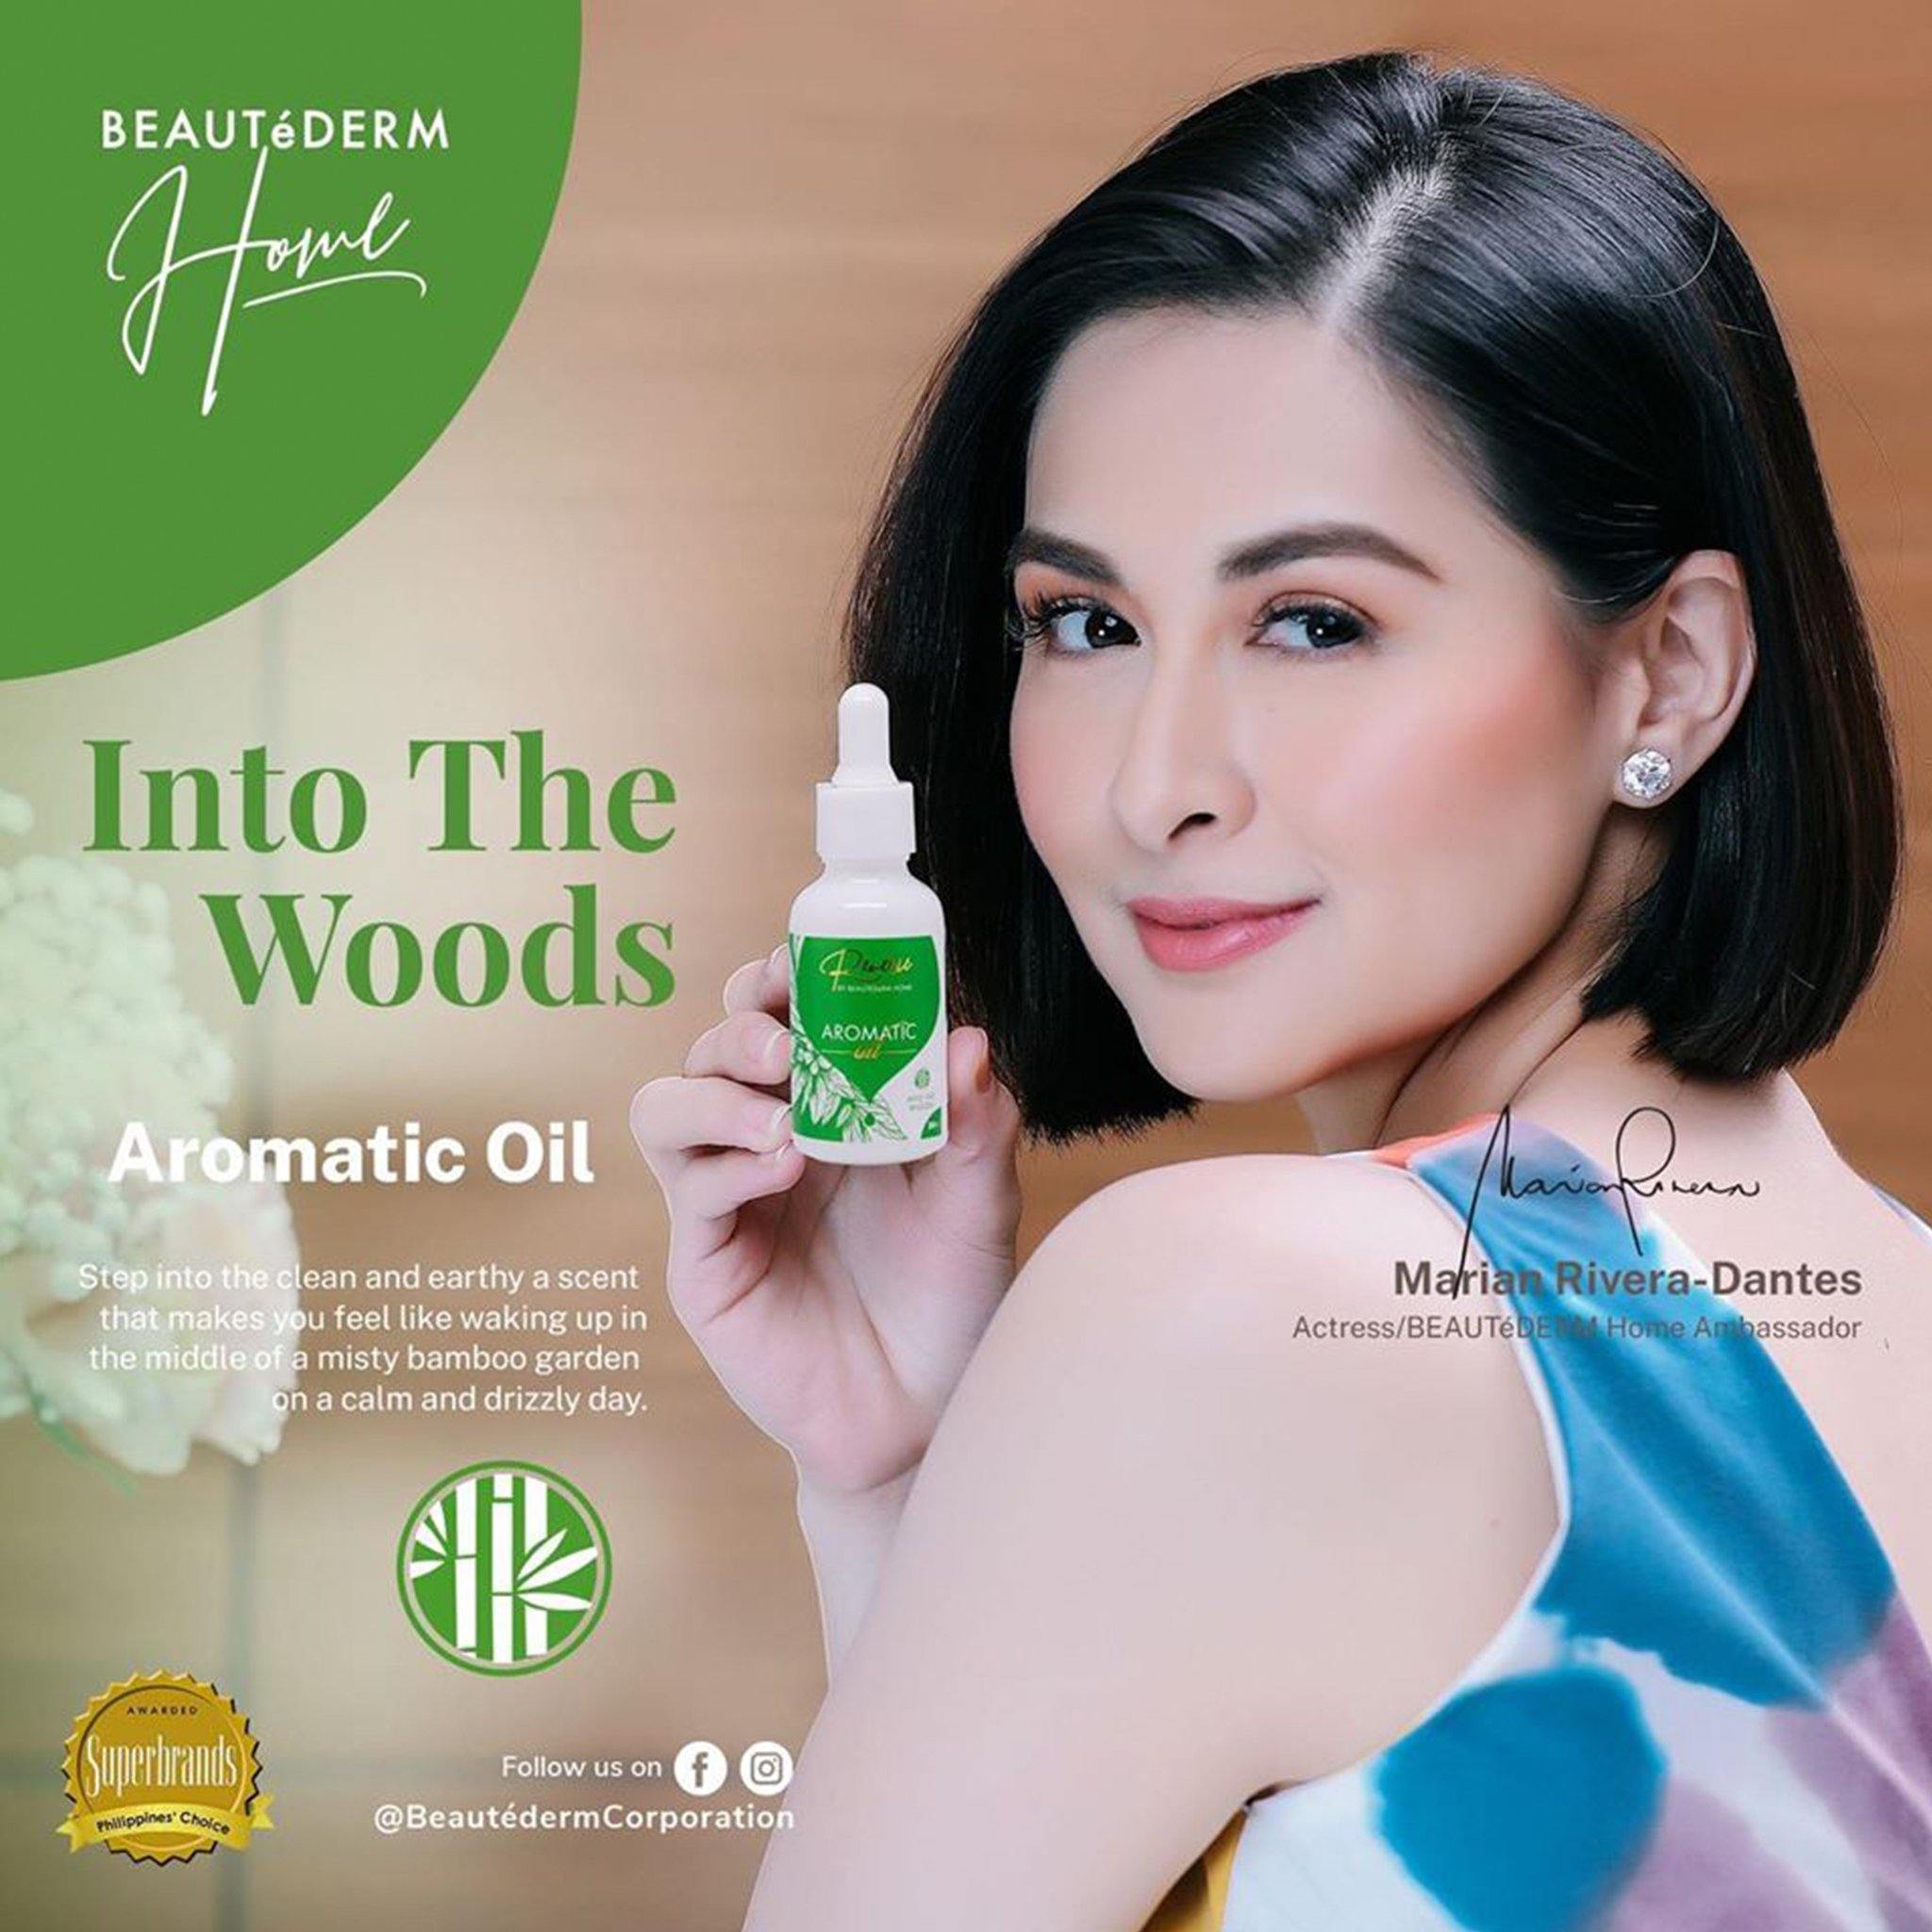 Aromatic Oil, Into The Woods (Bamboo Scent), 30ml, Reverie by Beautederm Home, with Marian Rivera-Dantes (Beautederm Home Ambassador)